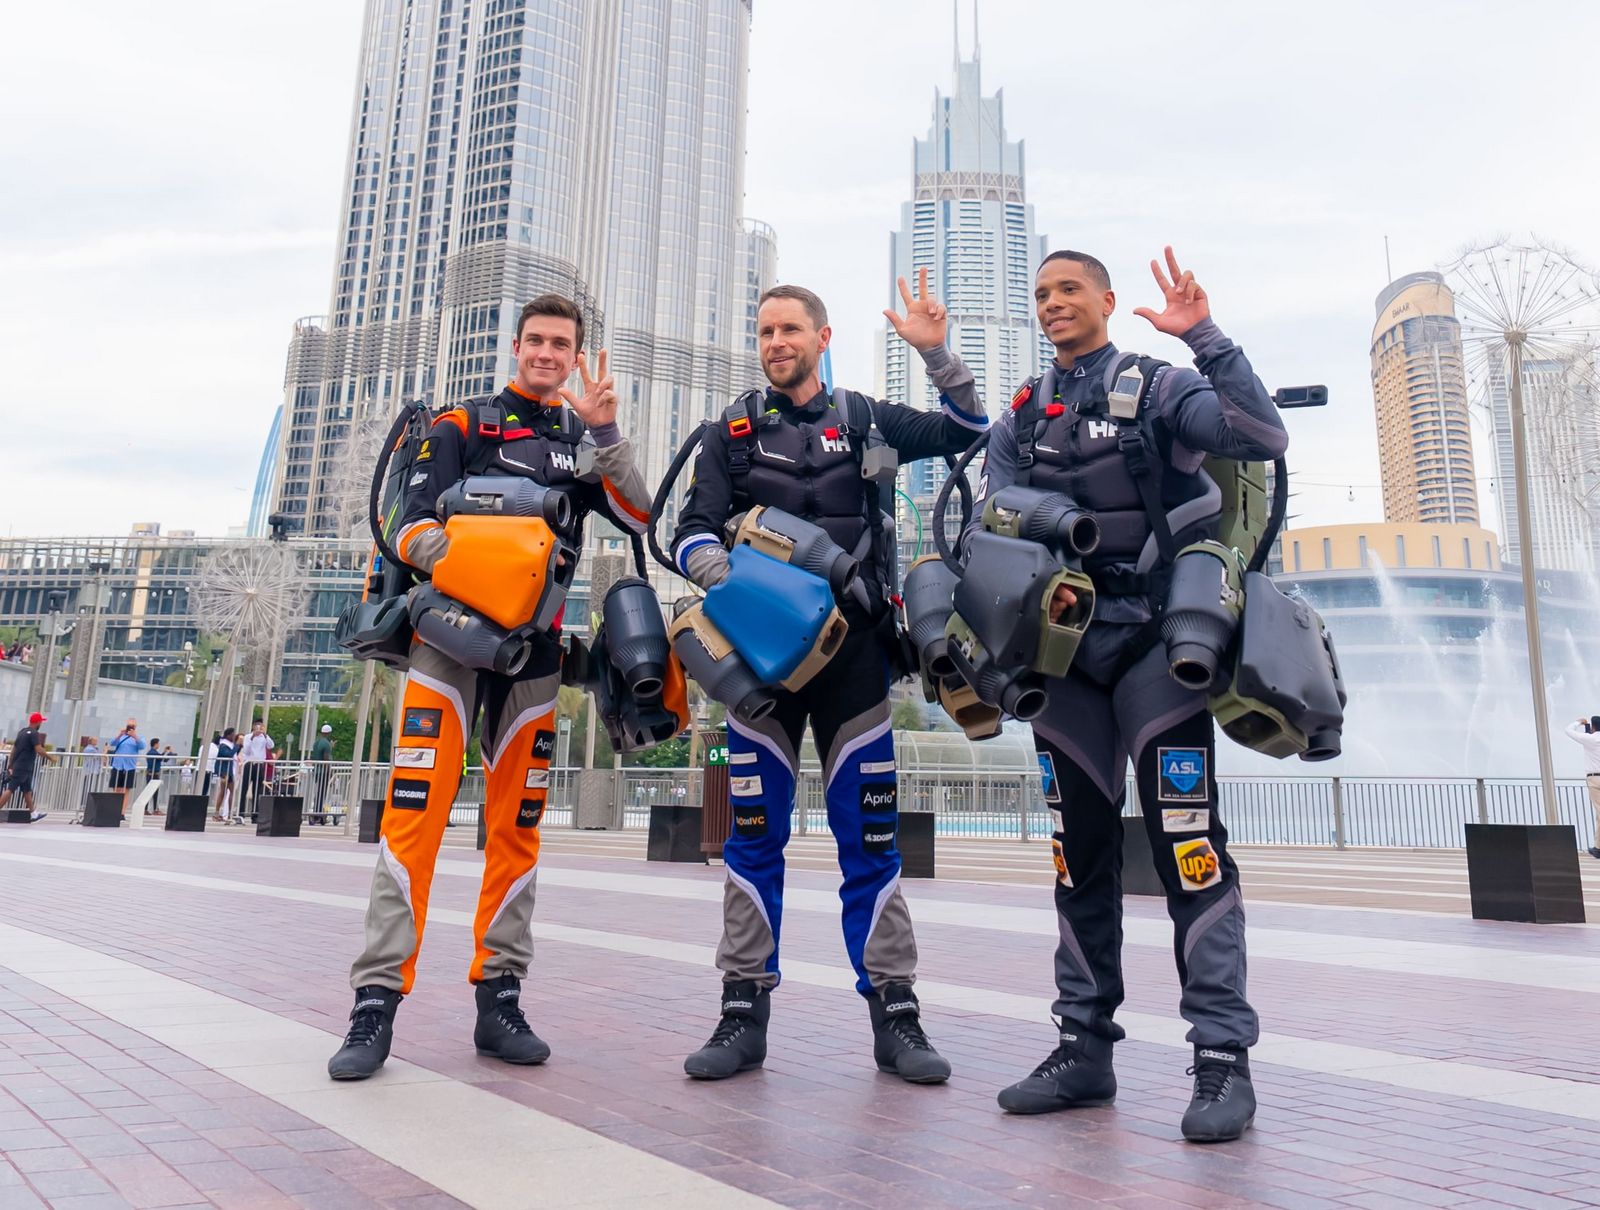 Forget Formula 1; the glitzy emirate of Dubai is hosting the world's first  jet suit race next month. Competitors strapped with jets will battle it out  in the skies. - Luxurylaunches